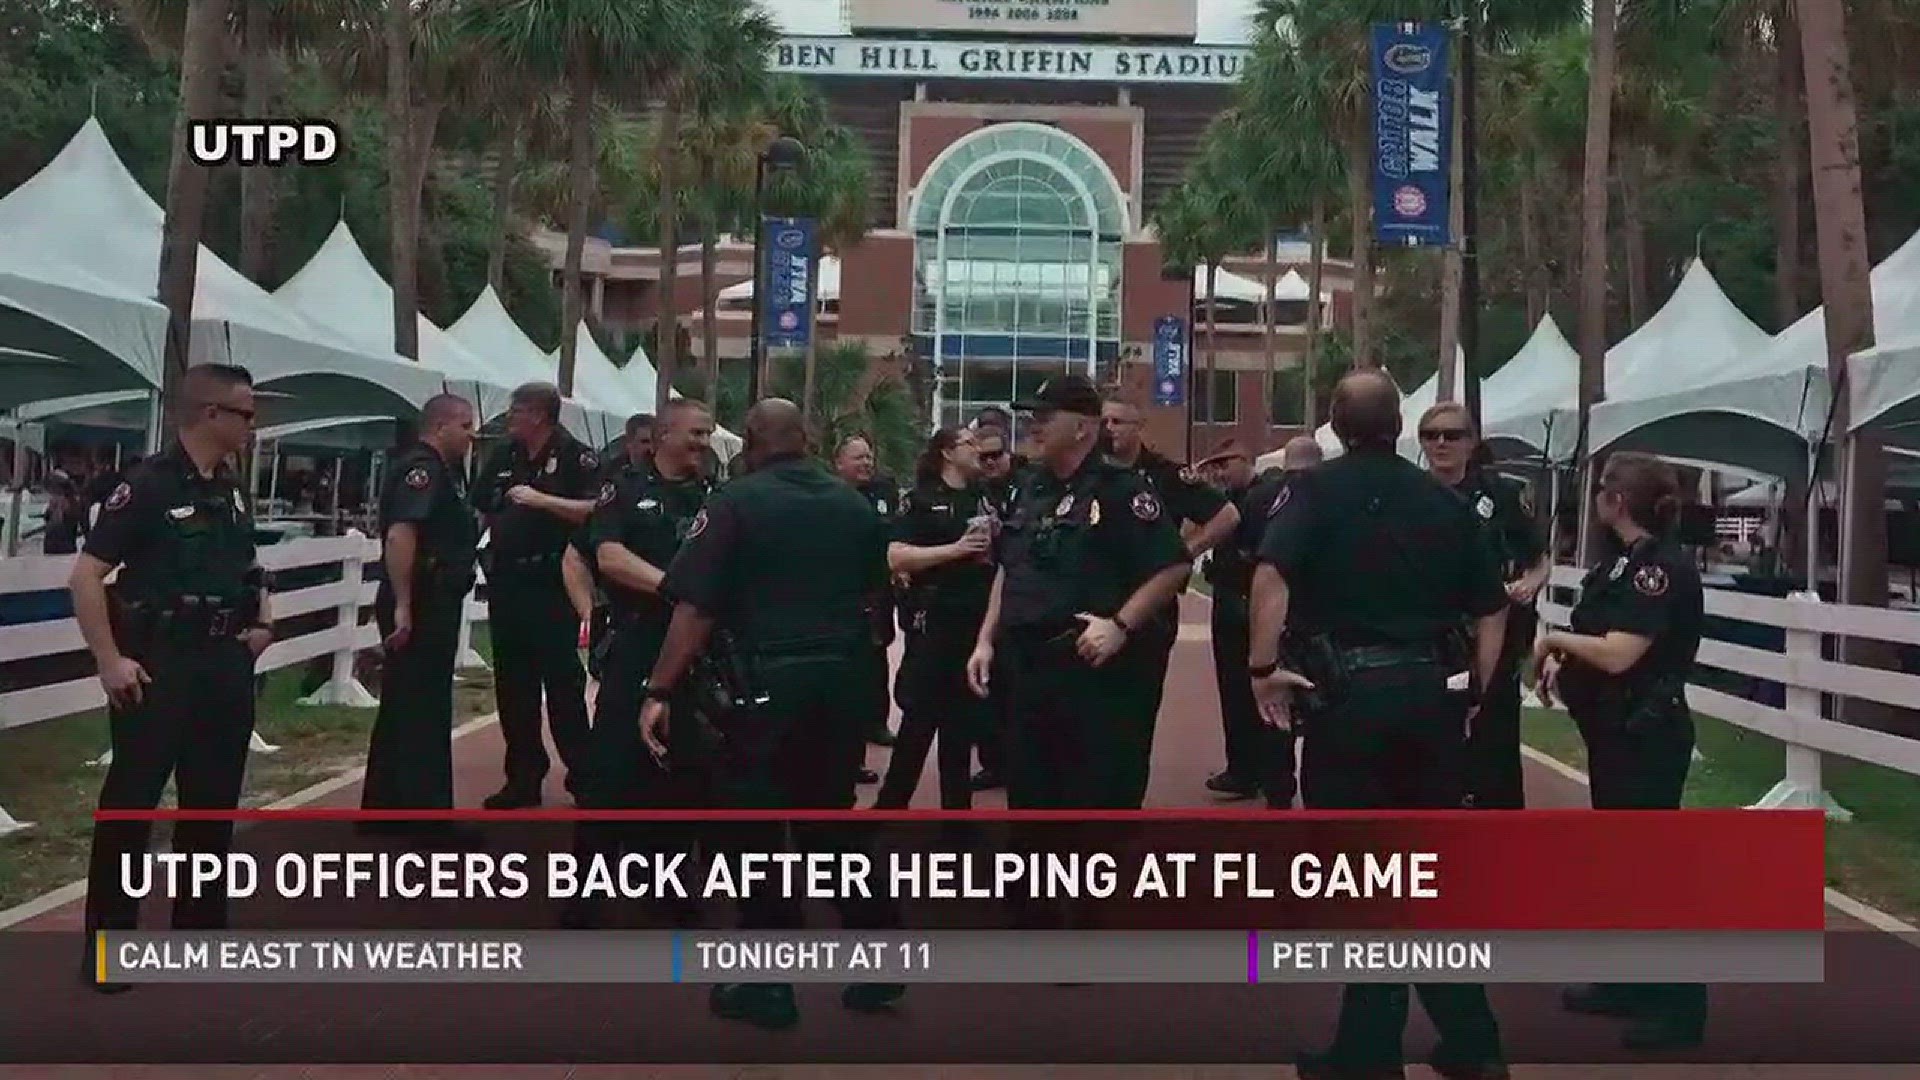 Sept. 18, 2017: 24 University of Tennessee police officers who traveled to Gainesville to help with security at the UT-Florida game are now back home in East Tennessee.